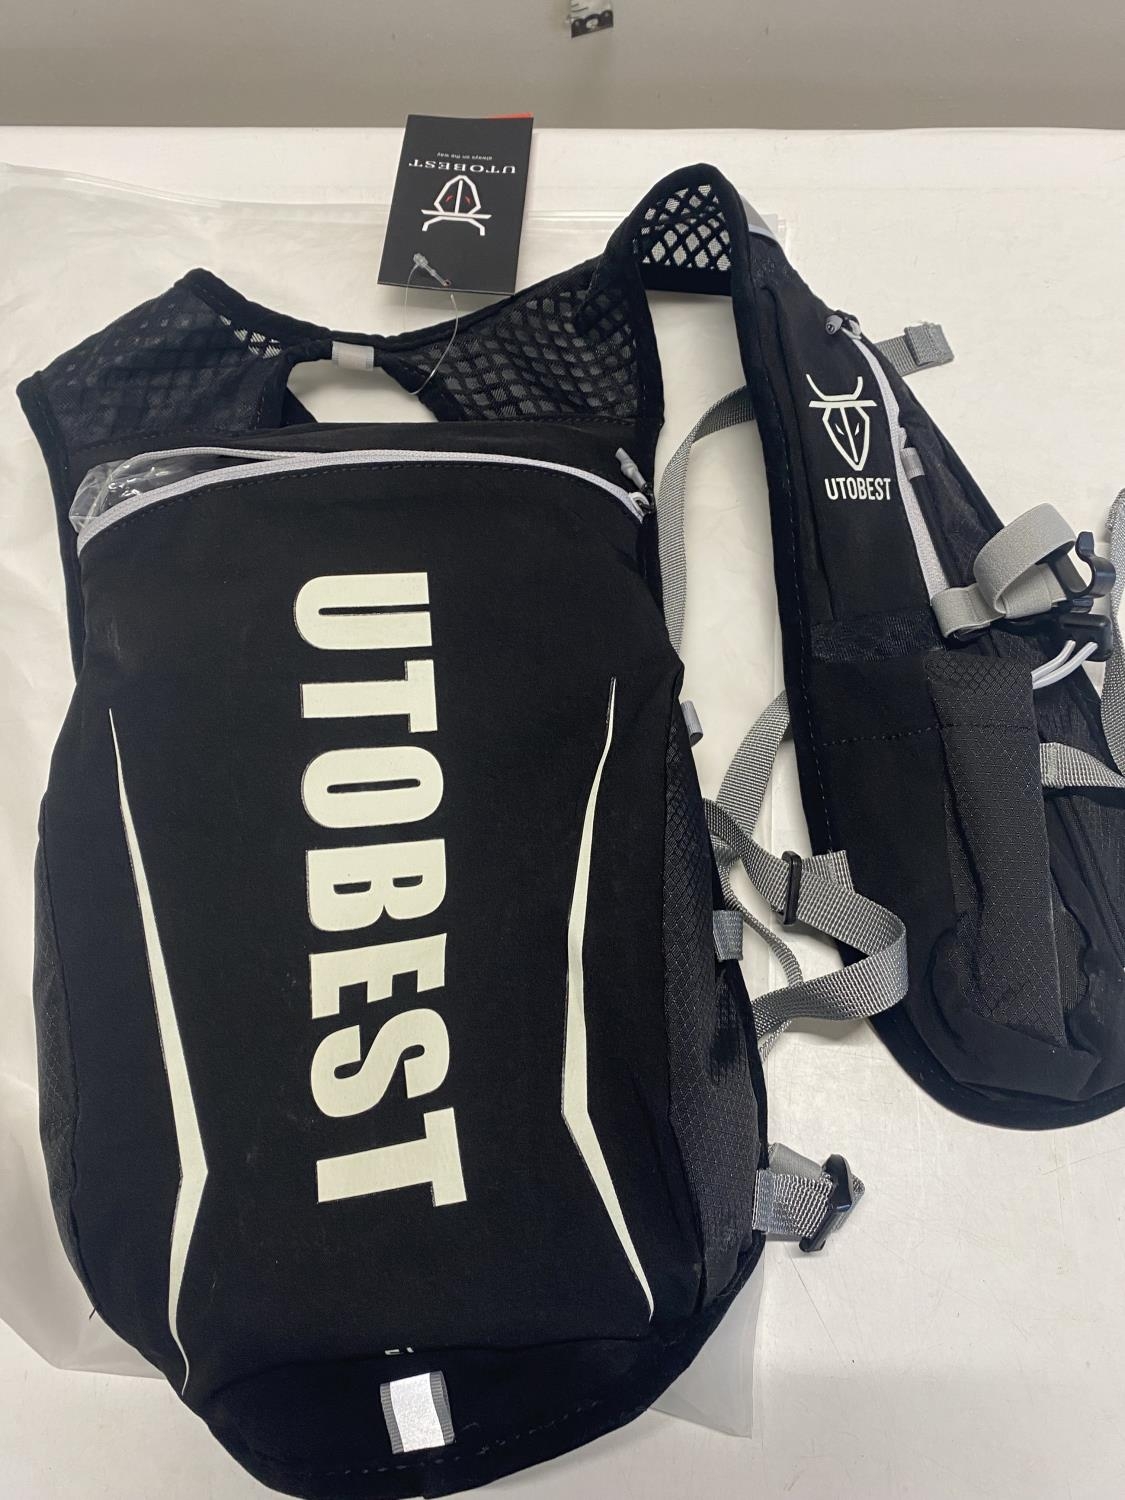 A new UTO Best sports backpack